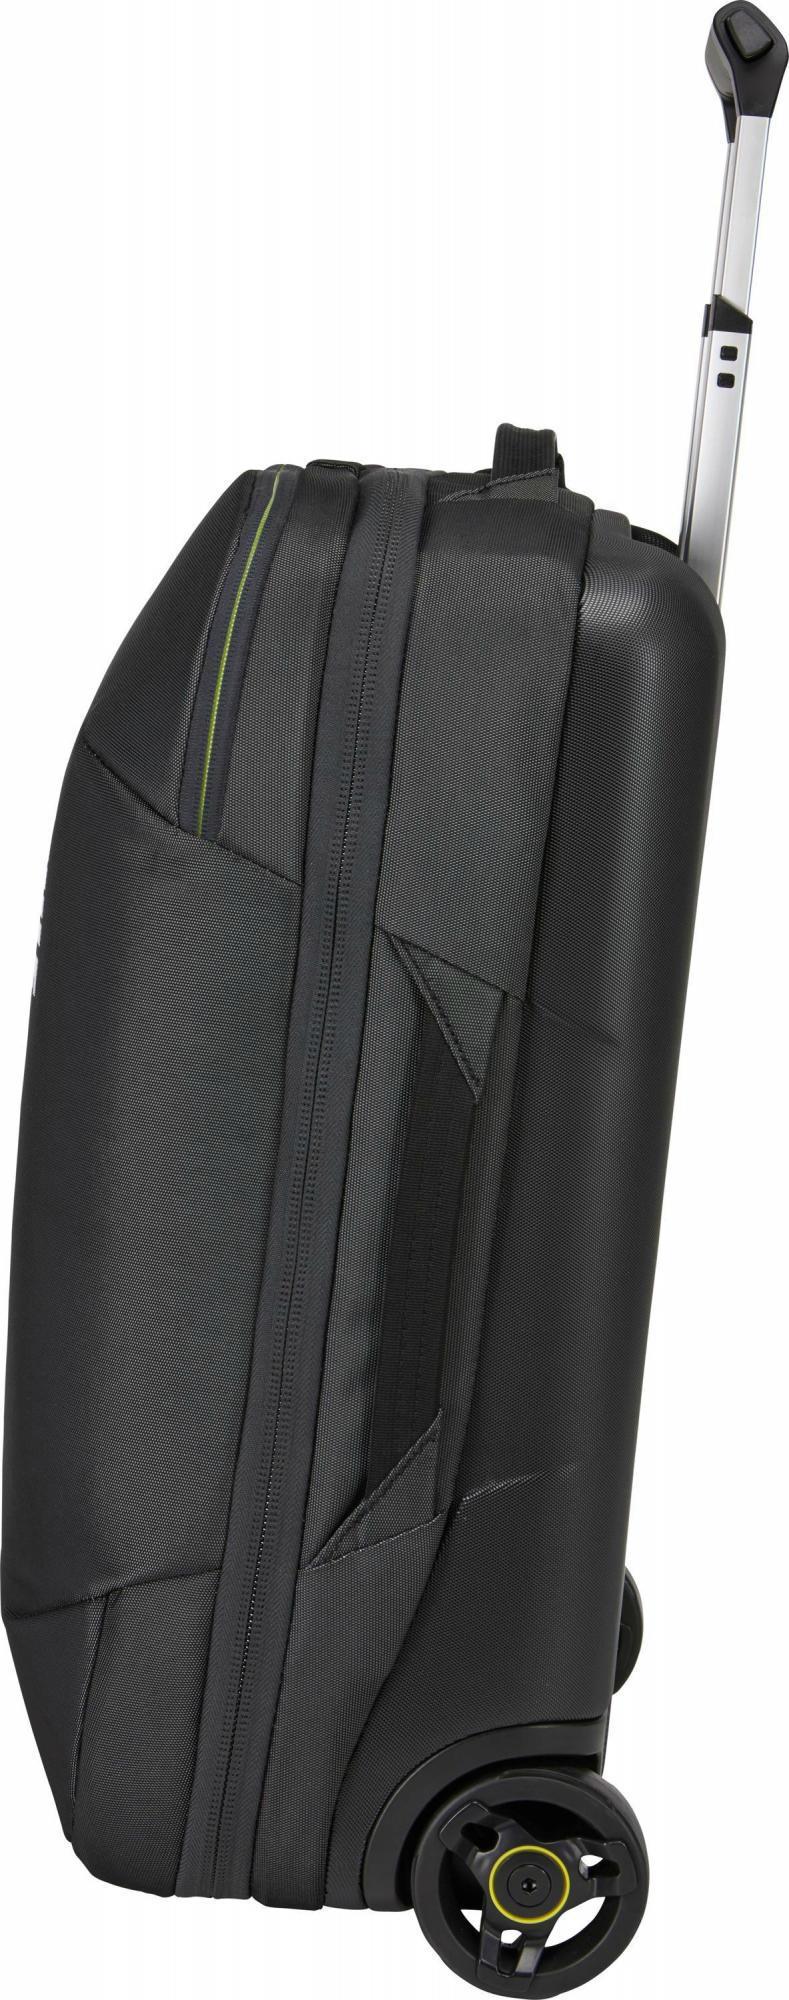 Thule Luggage Subterra Carry-On Luggage 55cm/22